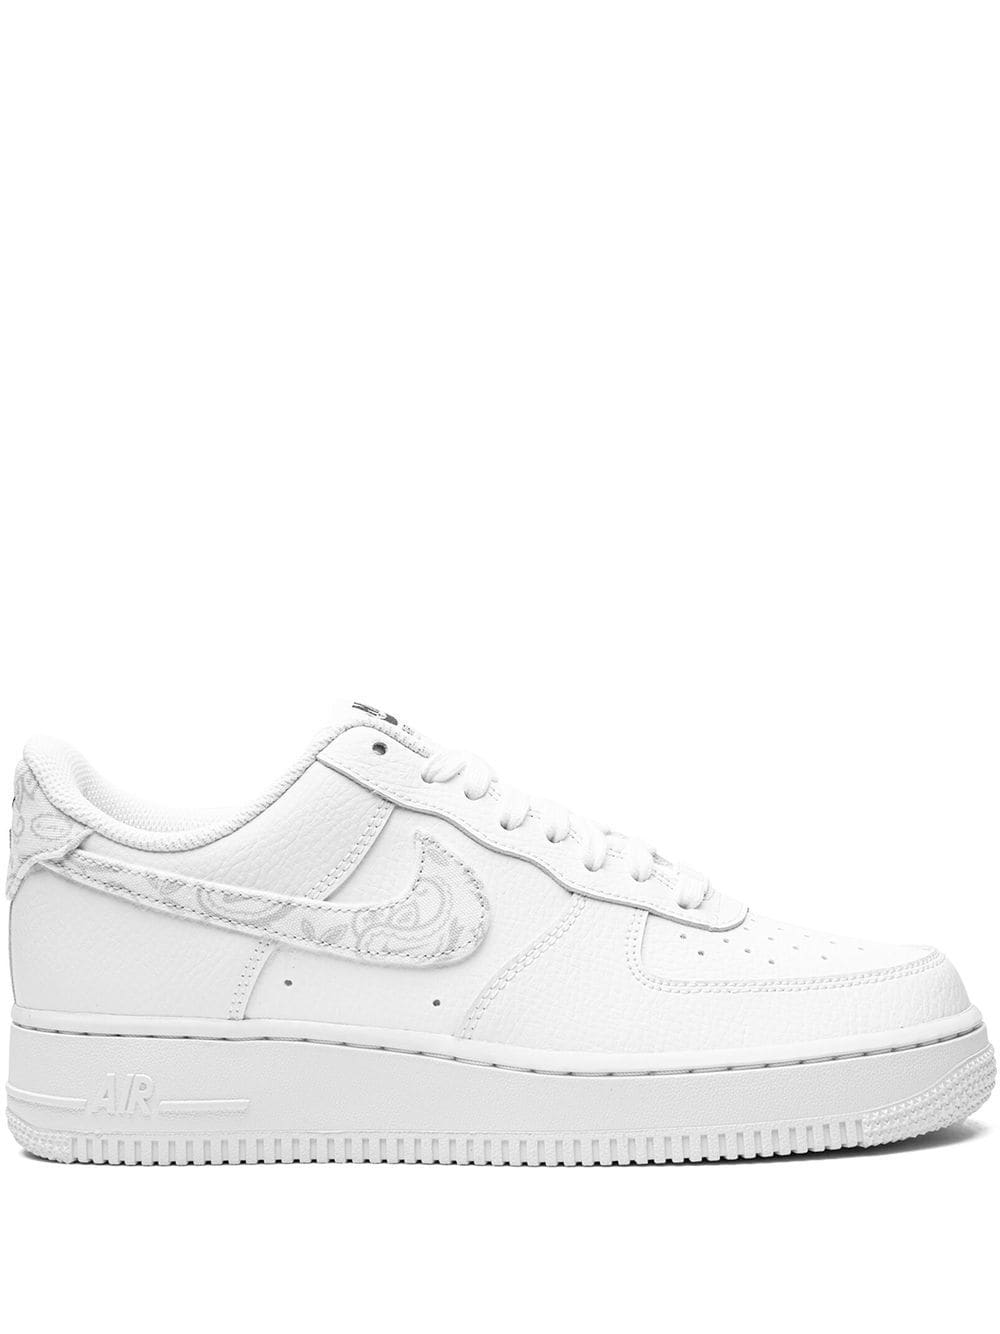 Nike Air Force 1 Low "White Paisley" sneakers von Nike